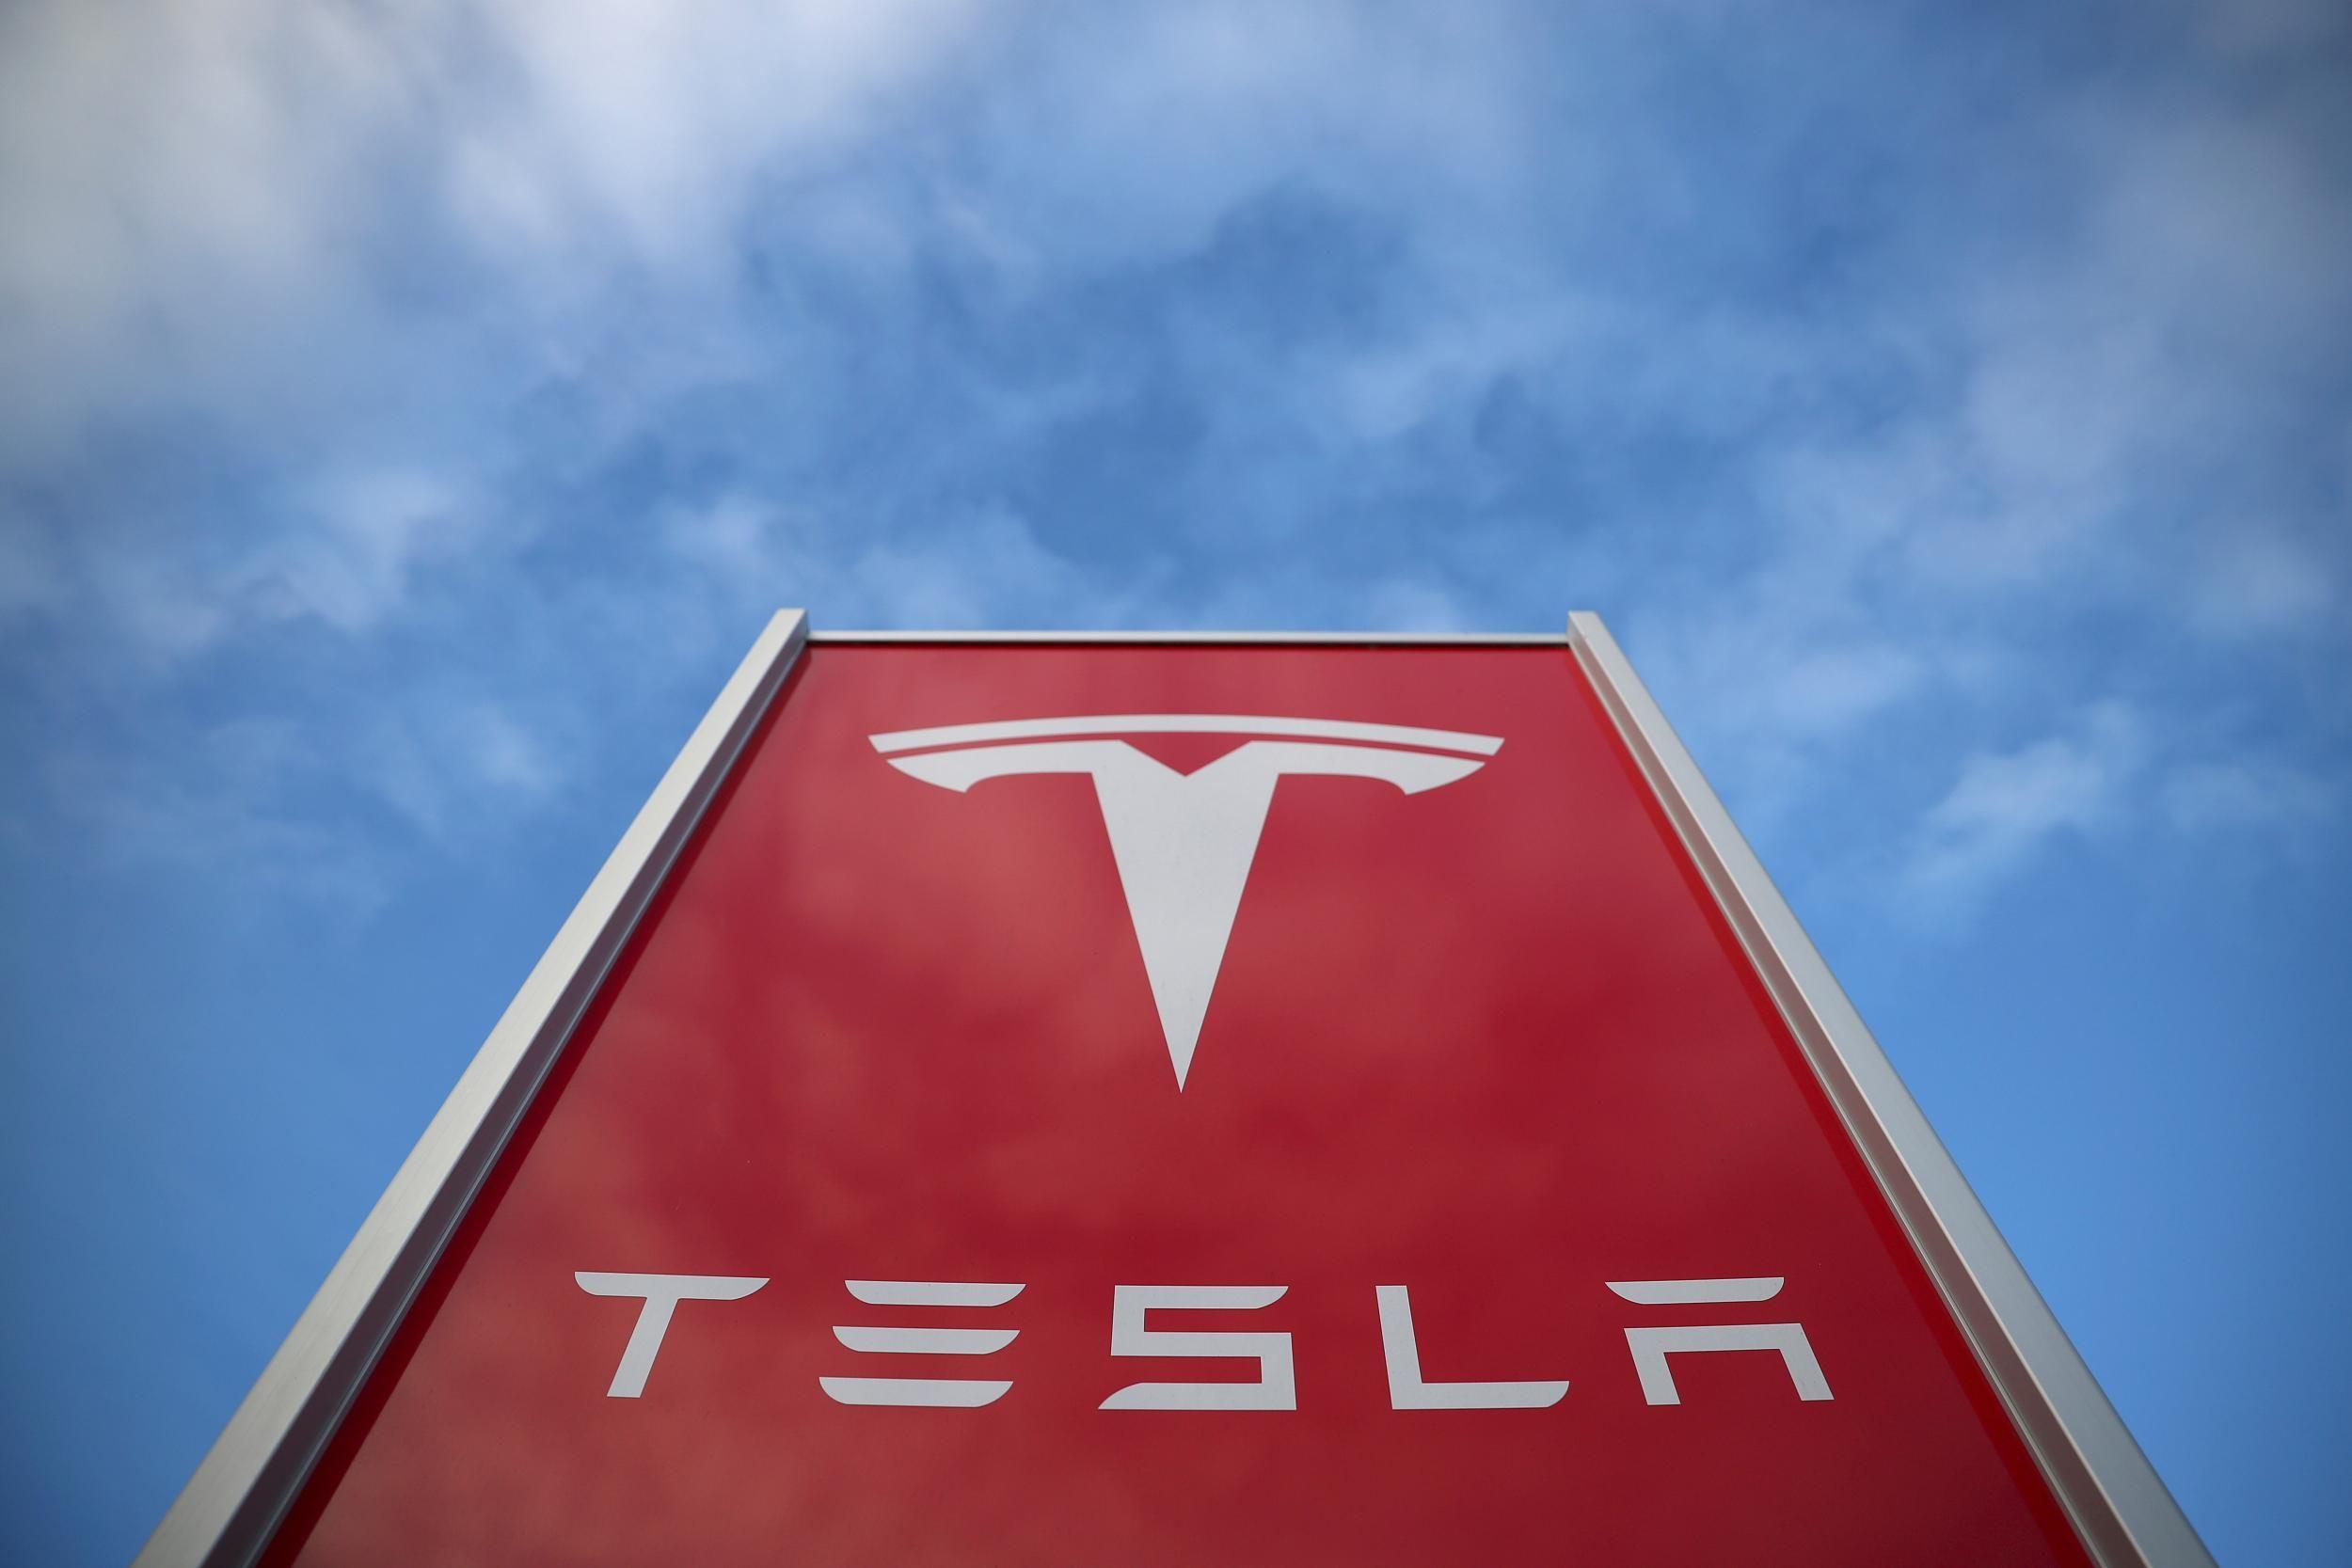 Tesla Business Logo - Tesla - latest news, breaking stories and comment - The Independent